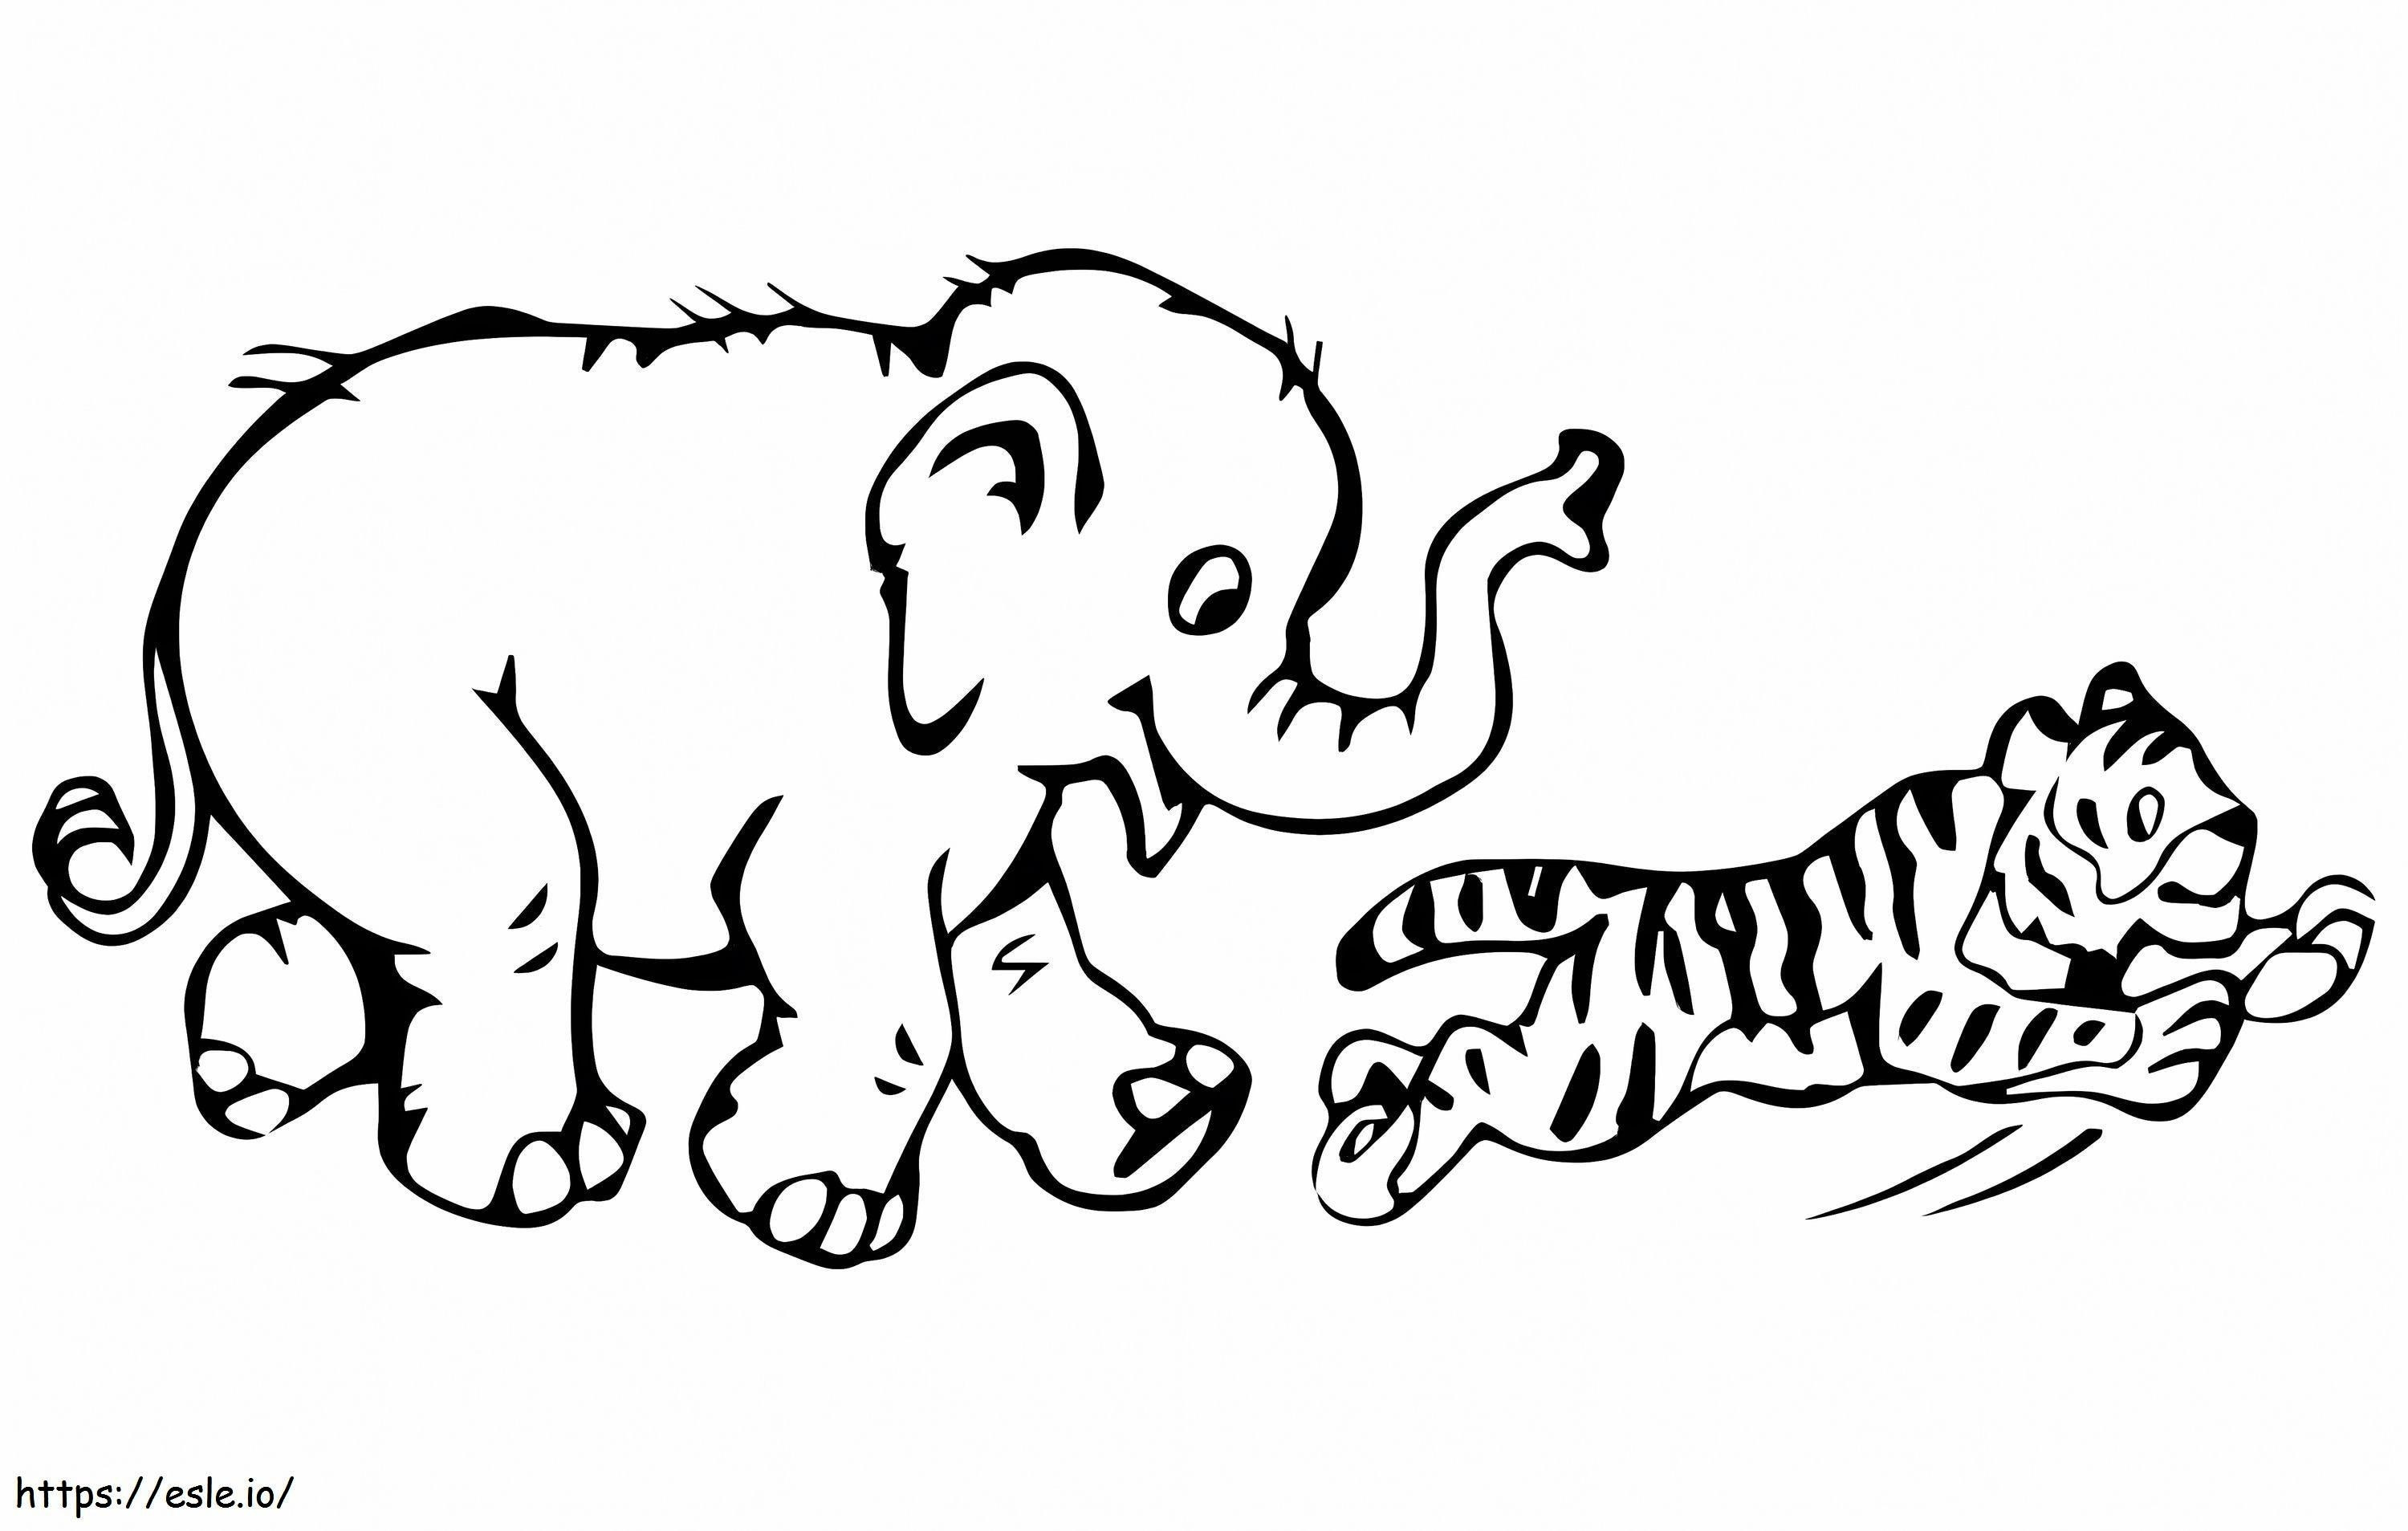 Tiger And Elephant coloring page